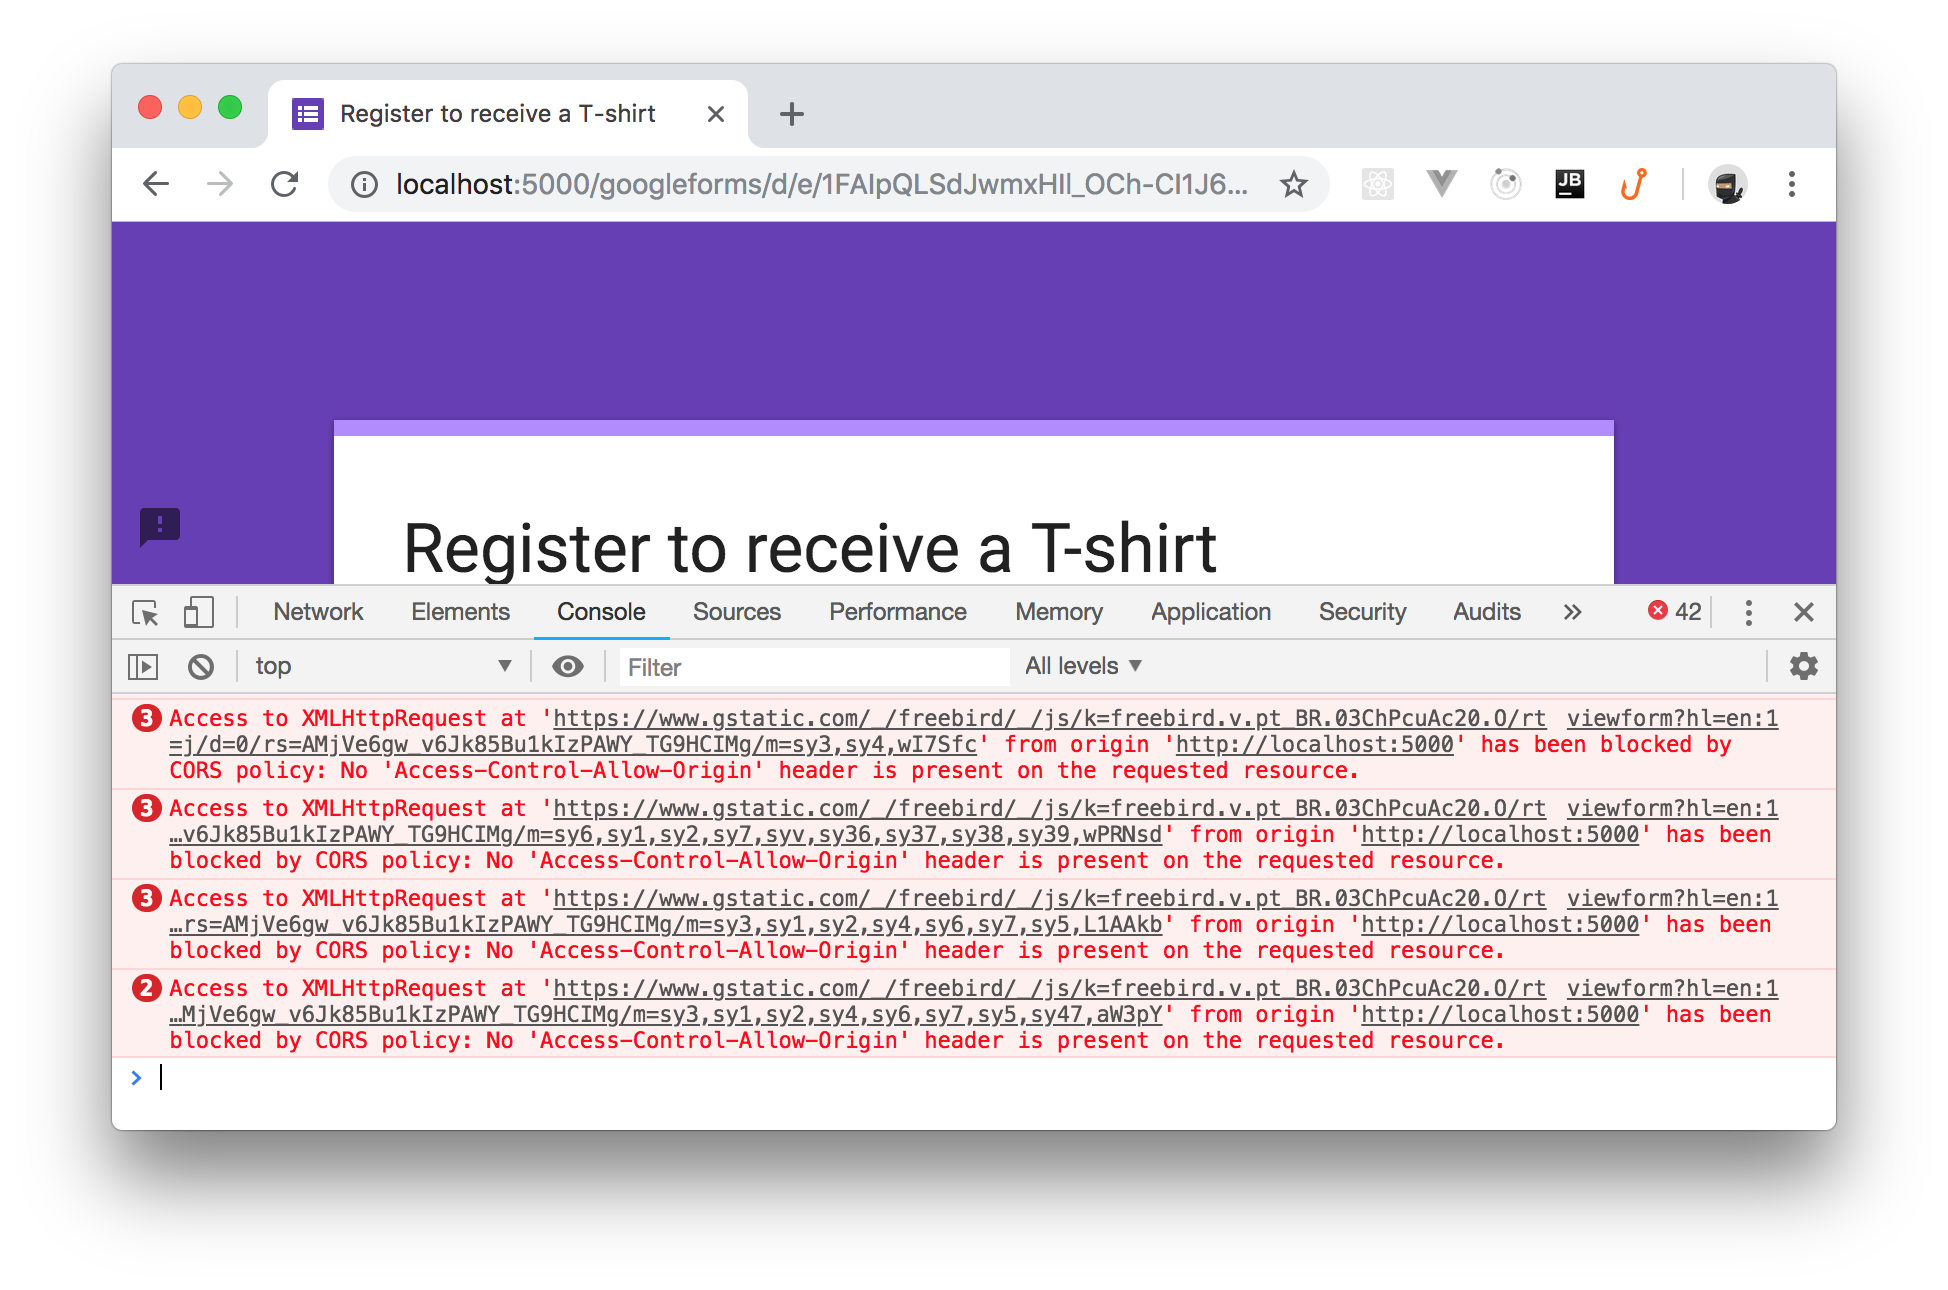 Dev tools console error messages shown while serving the Google Forms within application